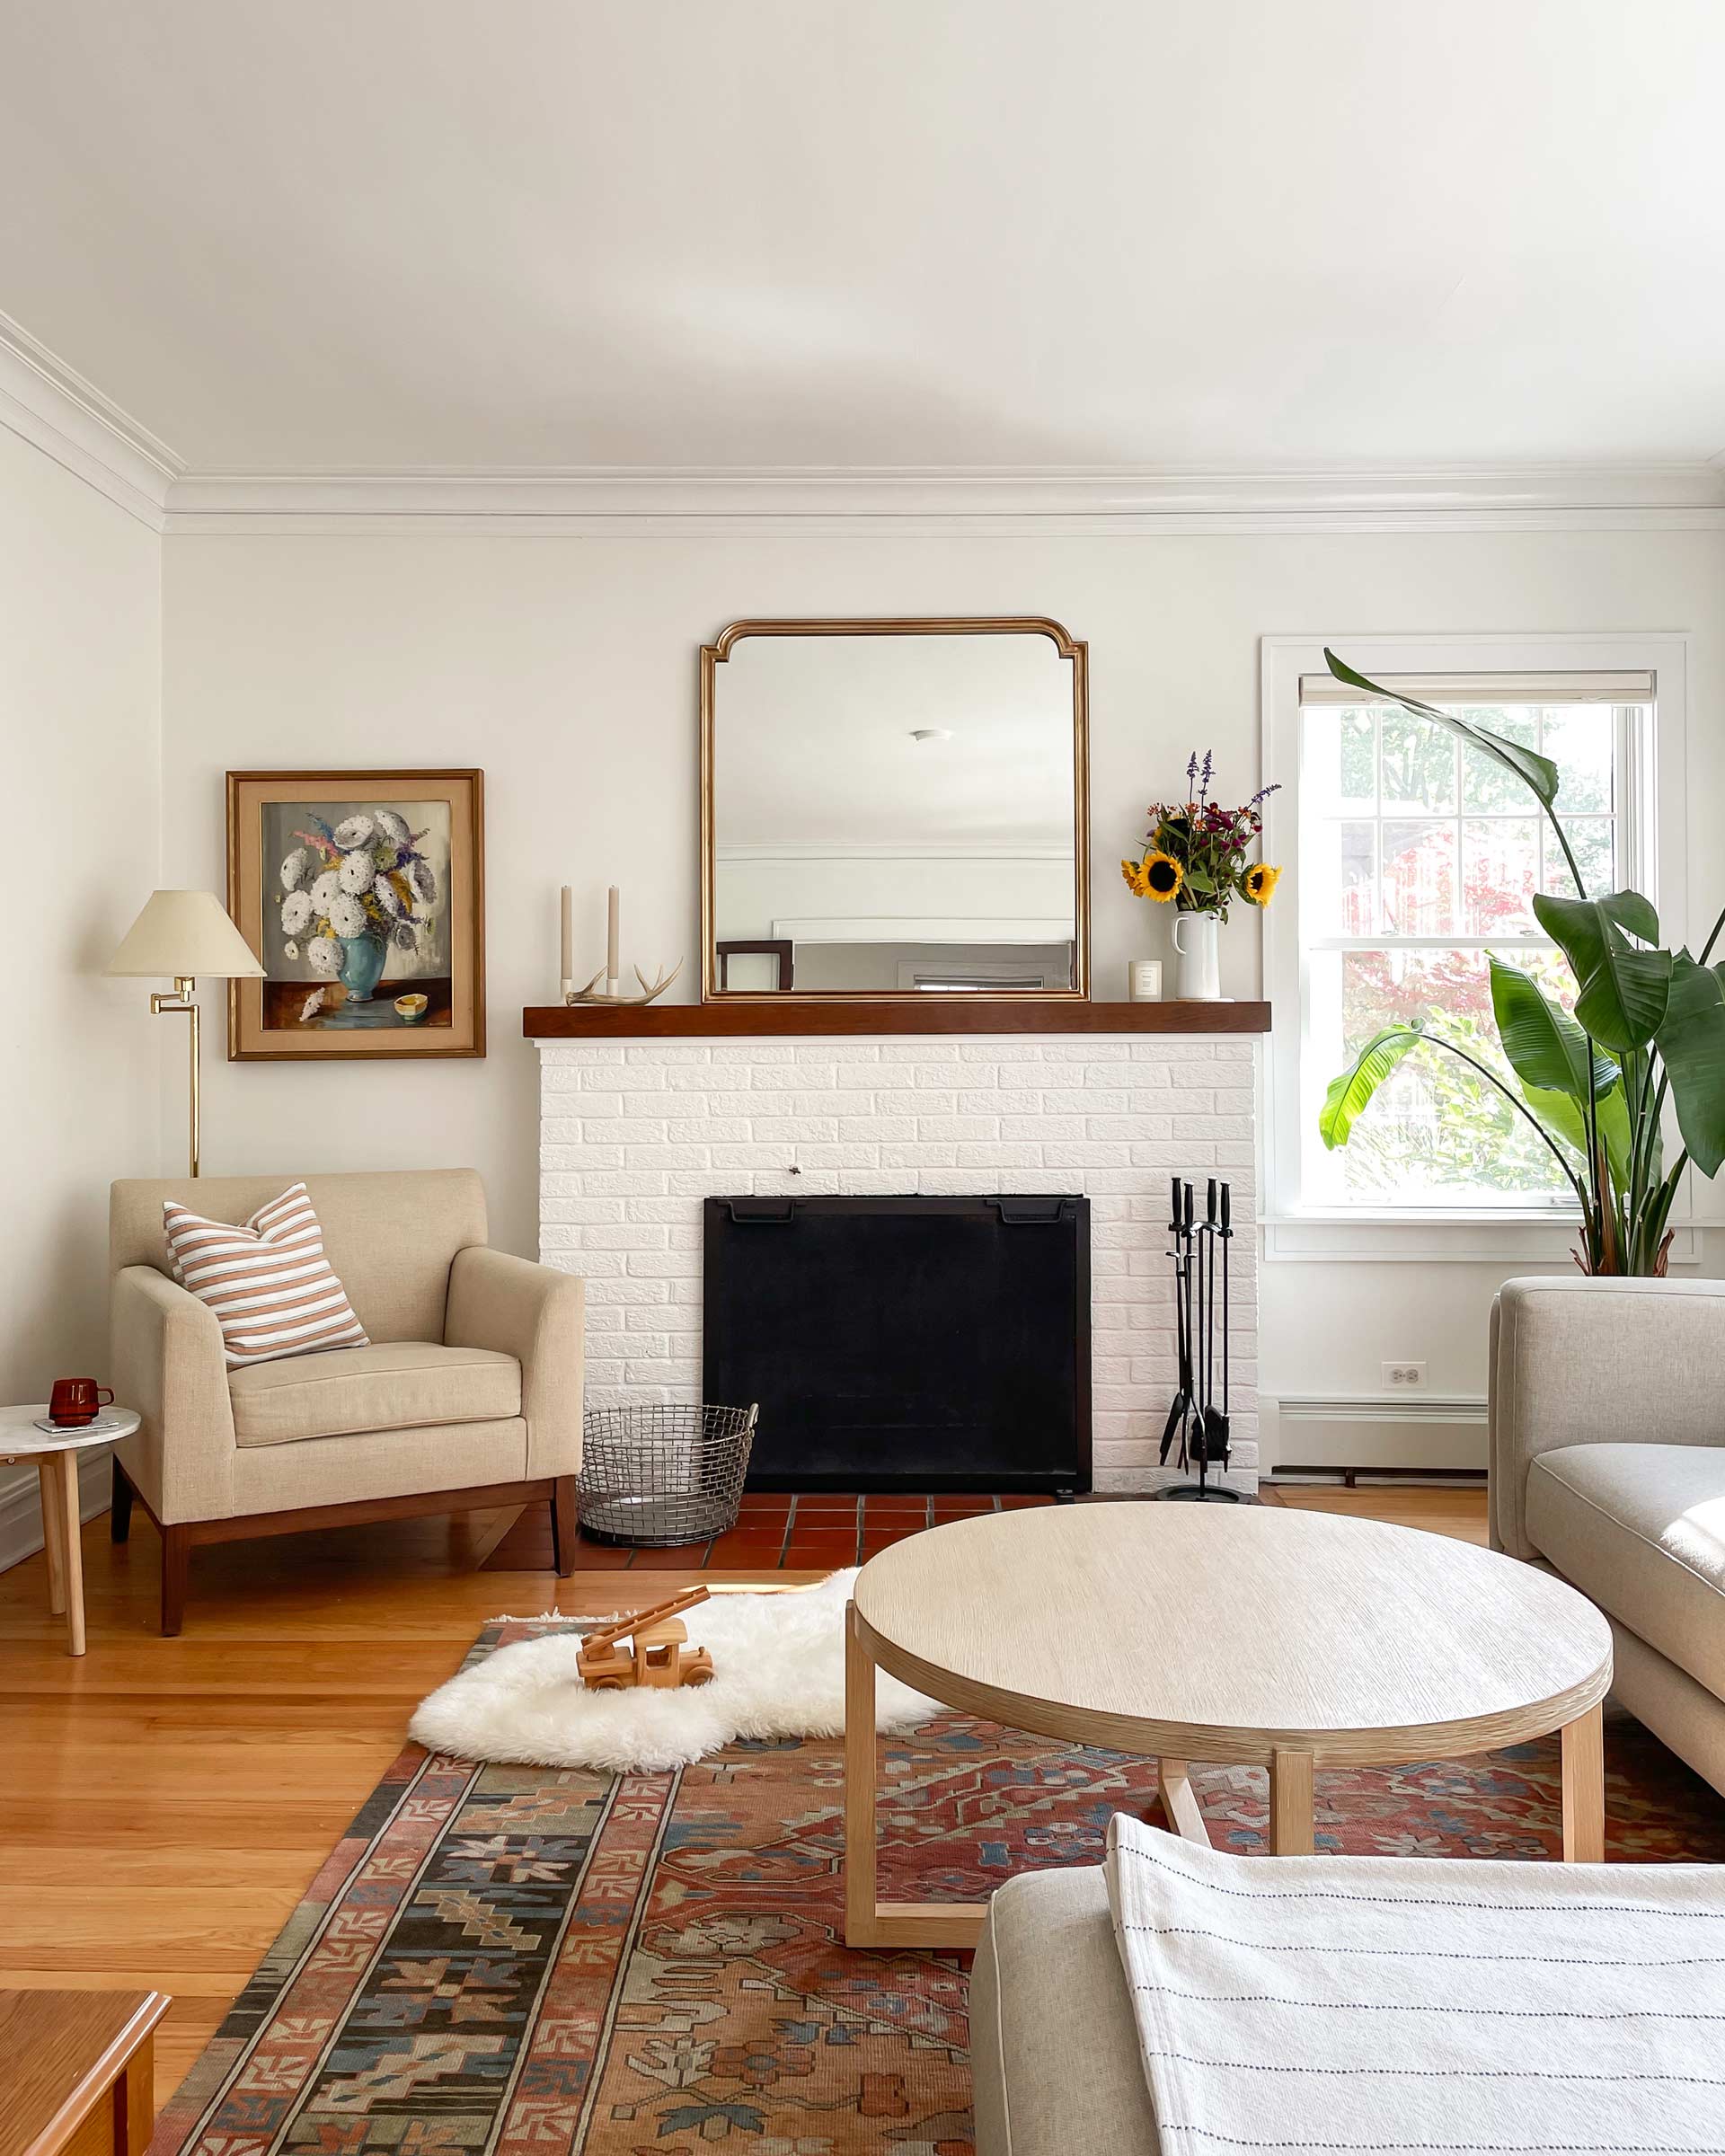 Living room with a white, brick fireplace and heirloom home decor.